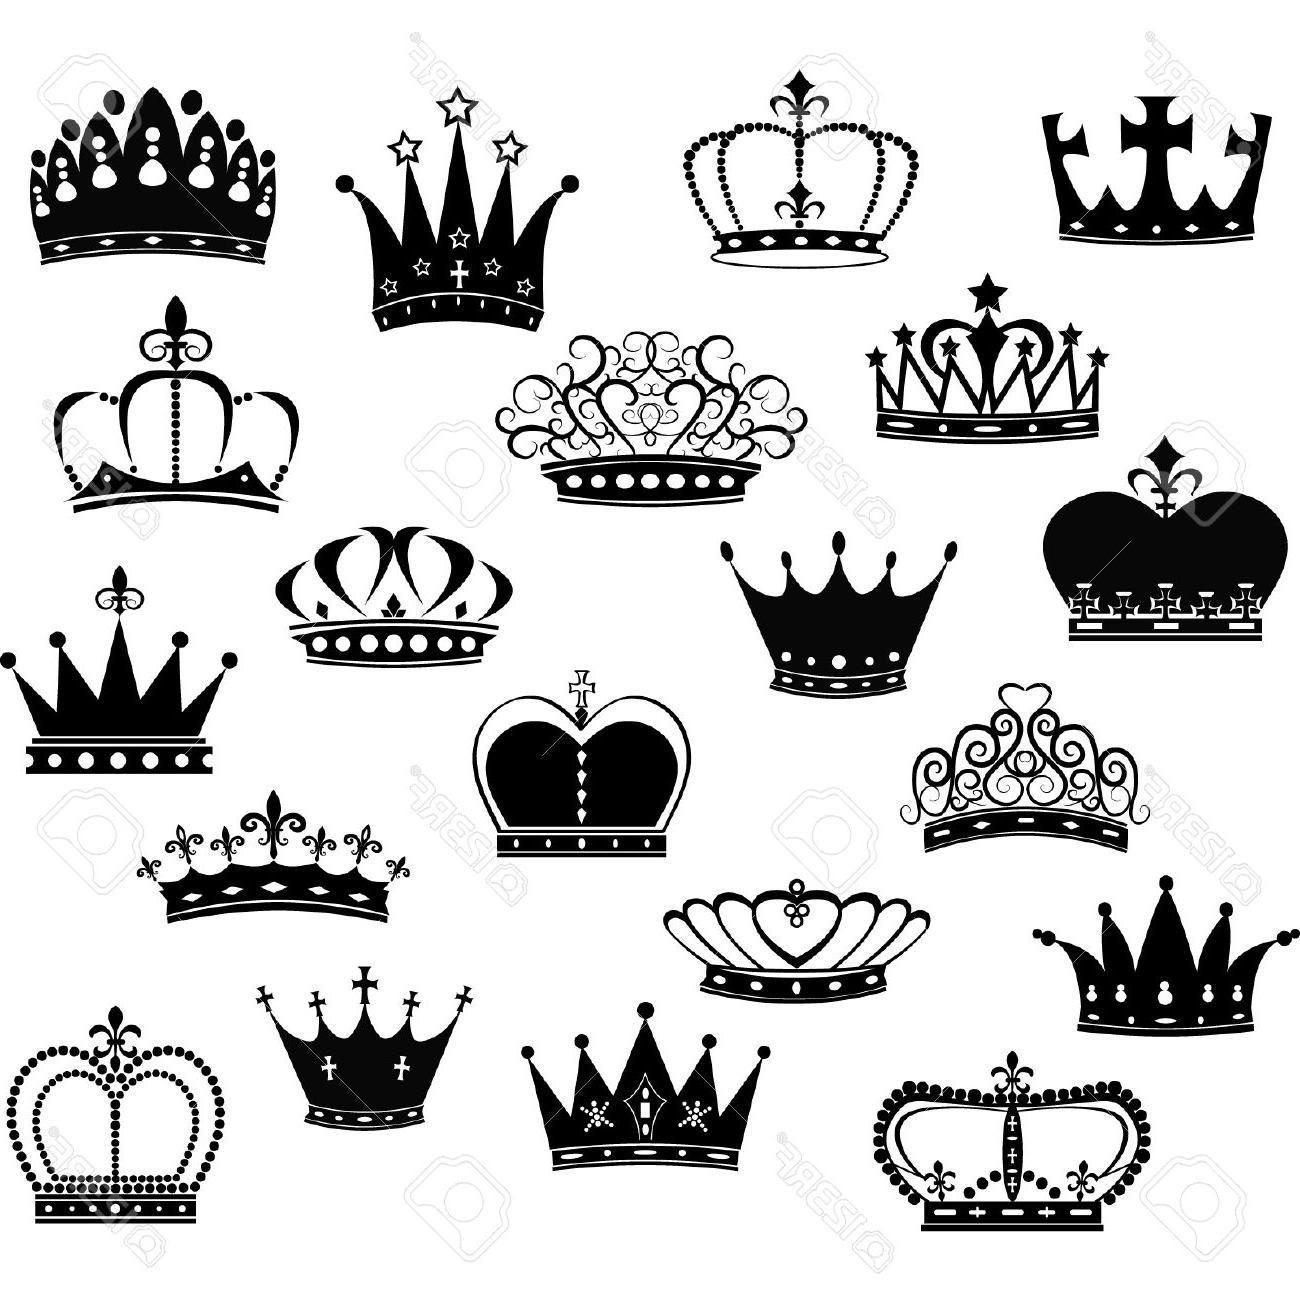 Download Crown Drawing Vector at PaintingValley.com | Explore ...